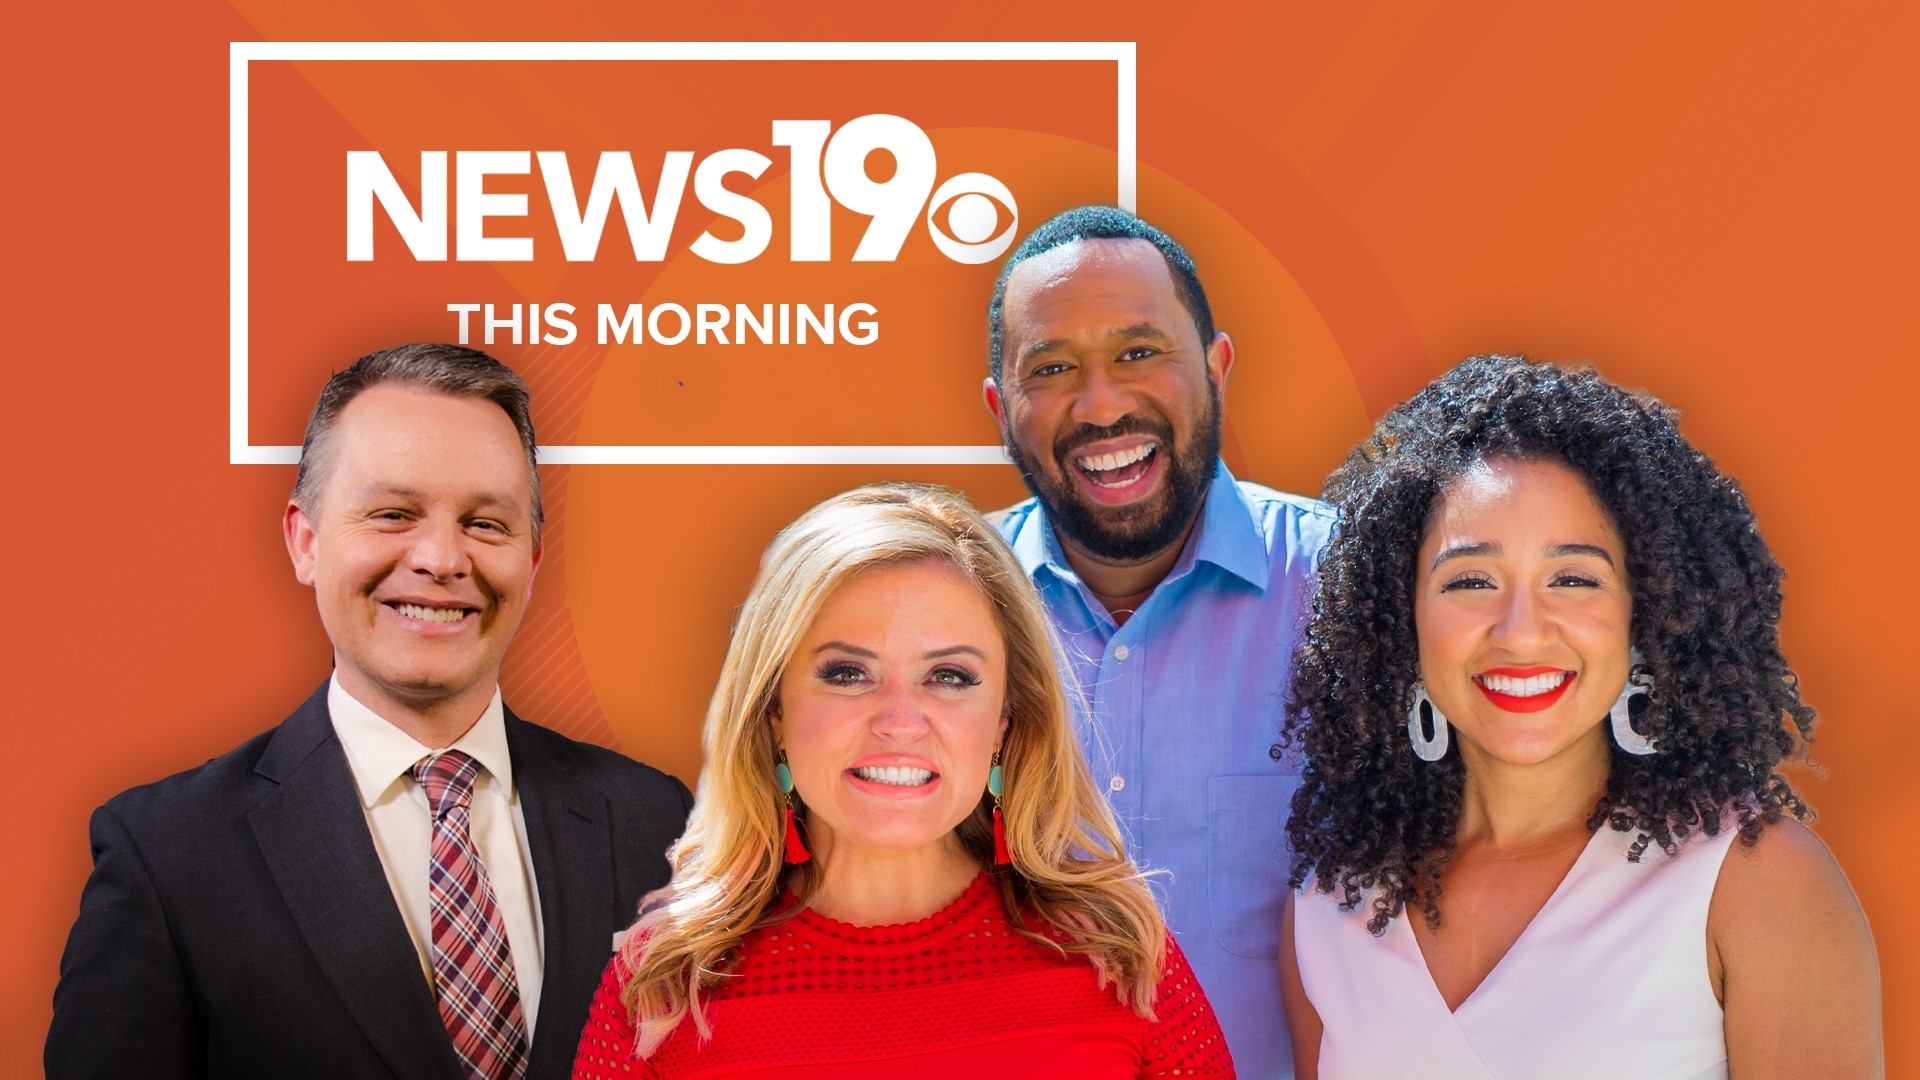 The News19 Morning team provides a look at updated overnight news and developing stories, along with up-to-the-minute weather forecasts and live traffic conditions.